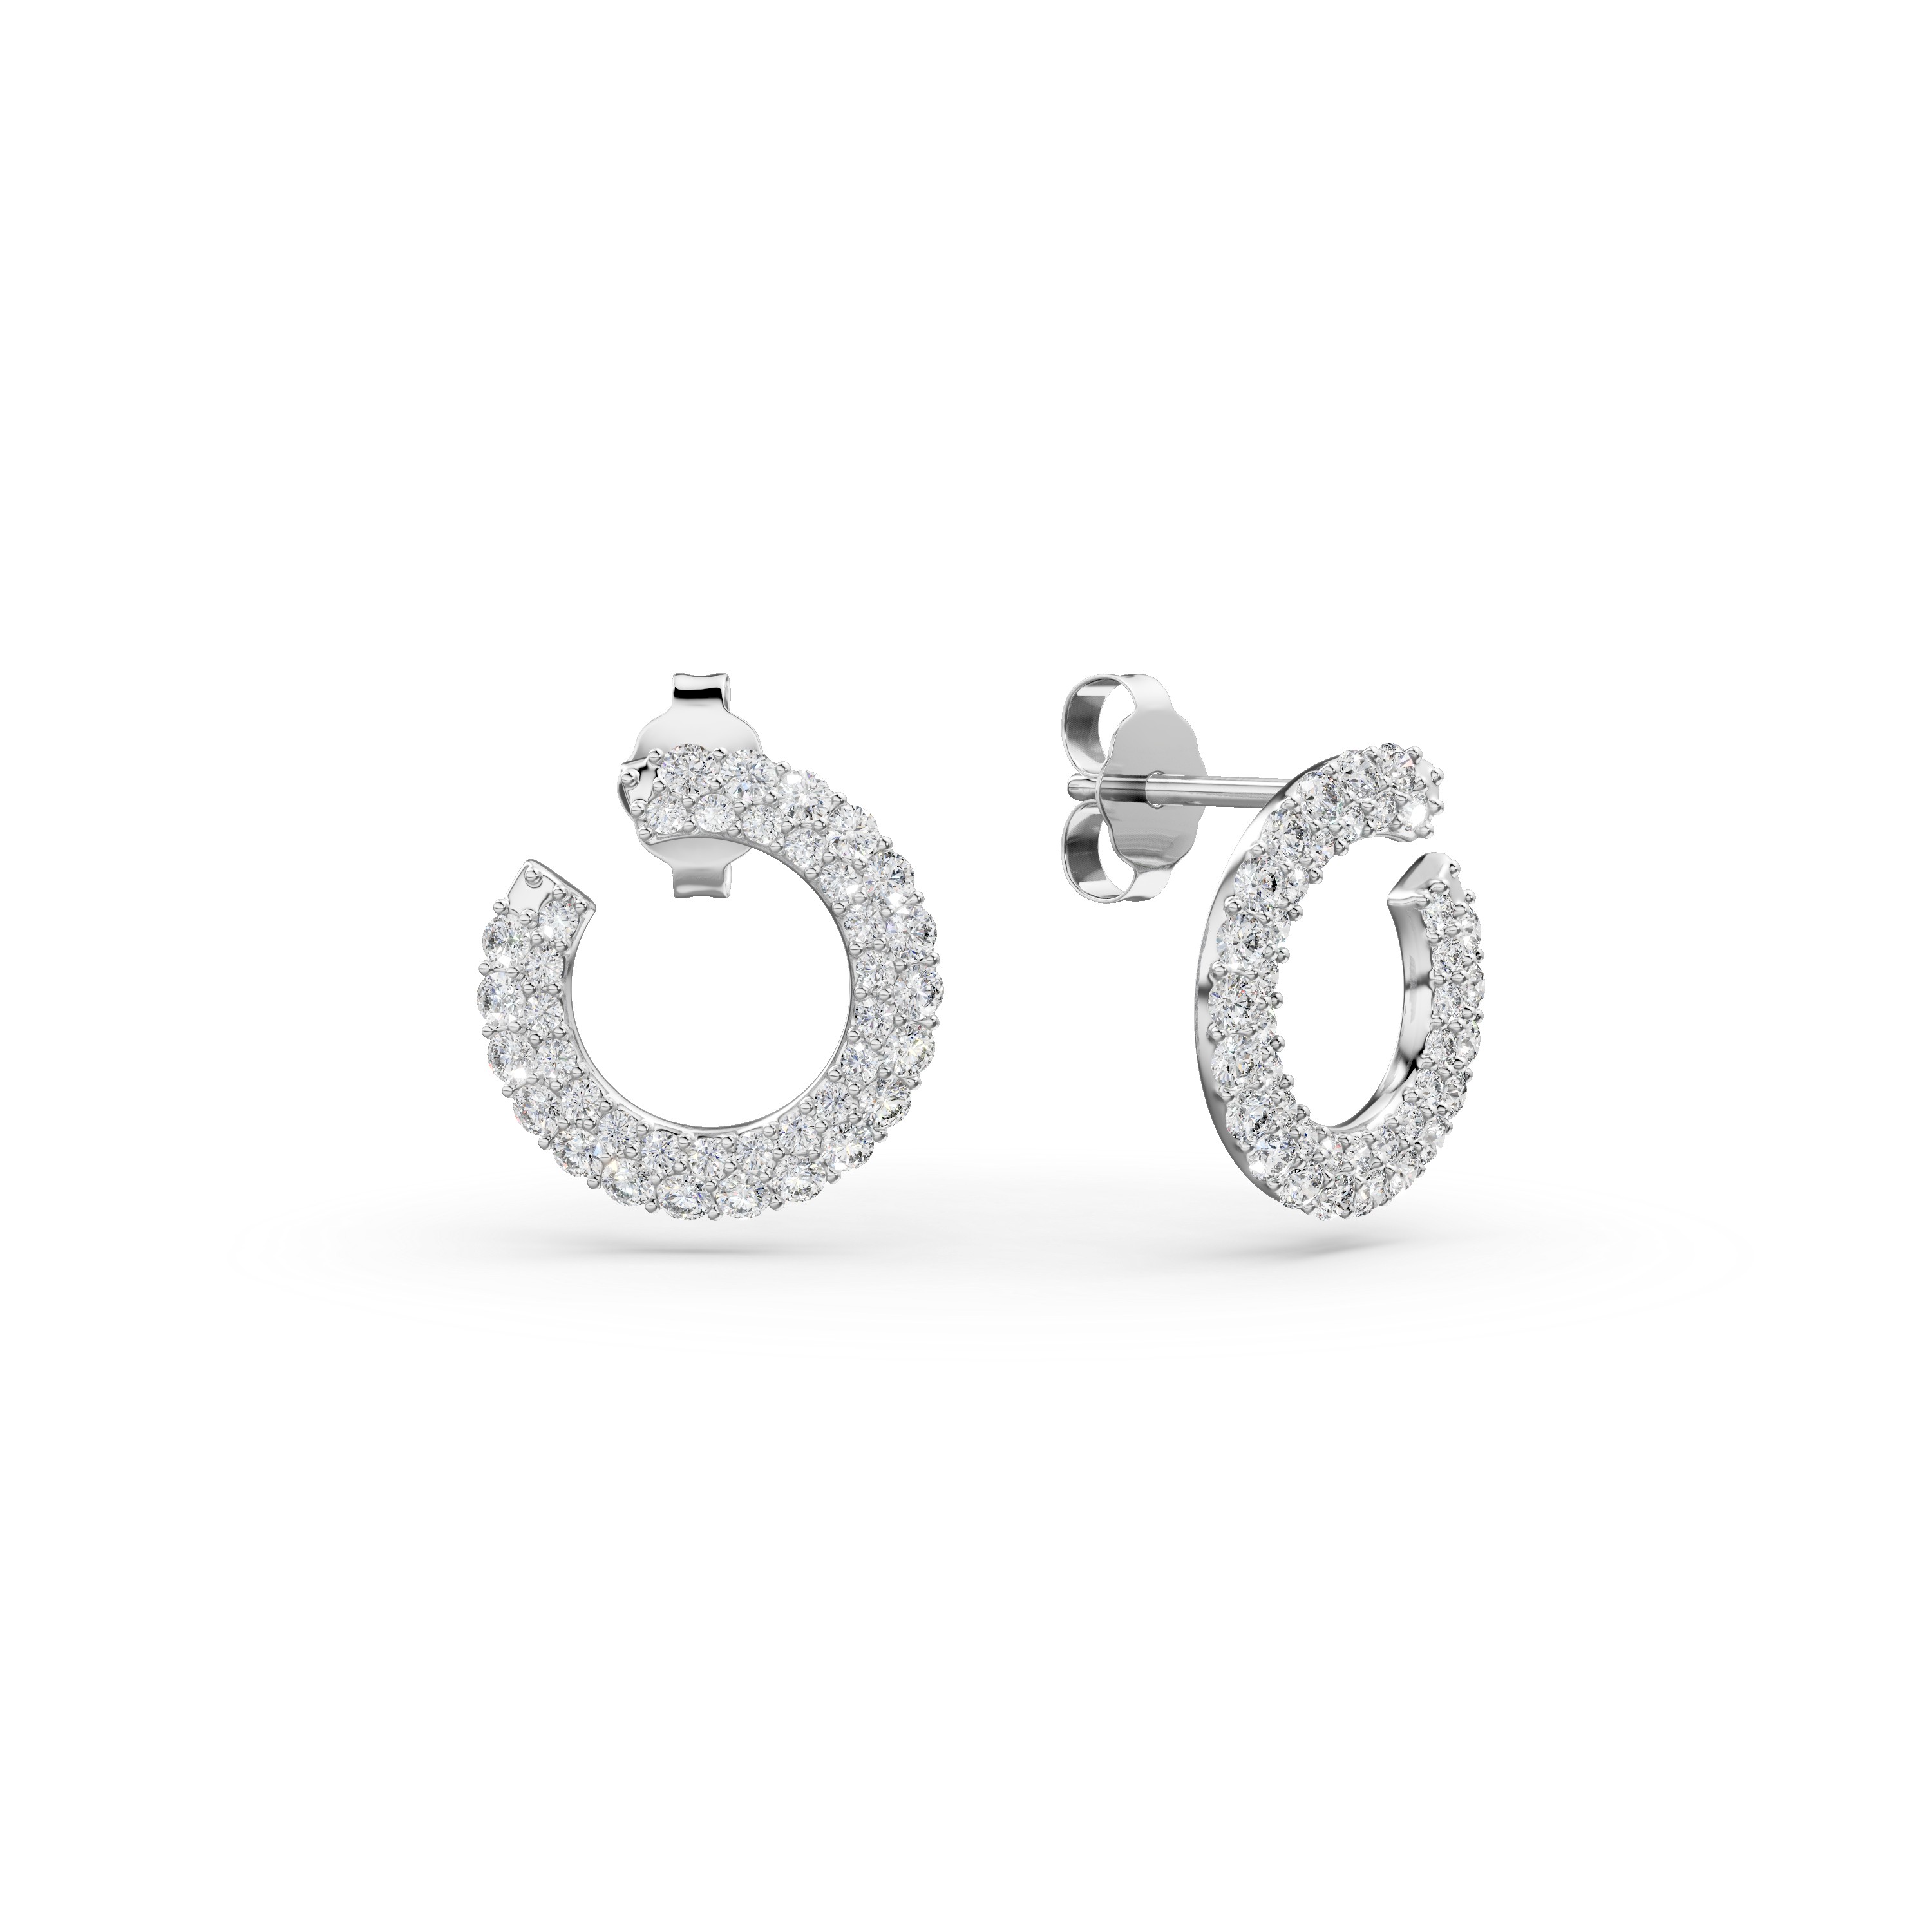 White gold geometric earrings with zirconia